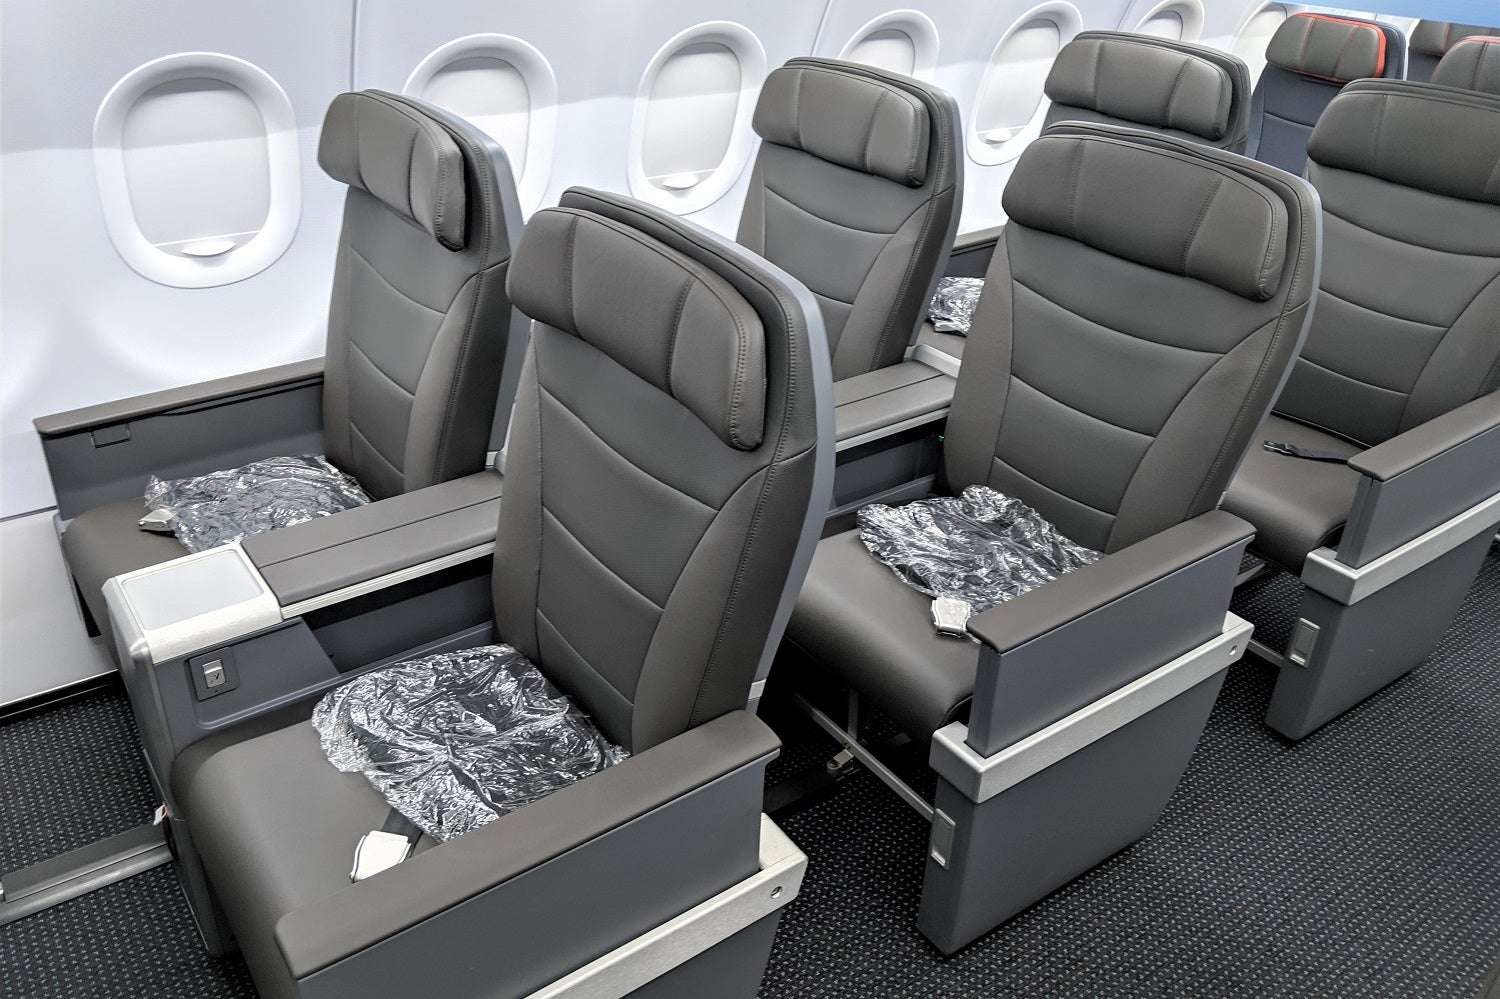 American a321neo first class